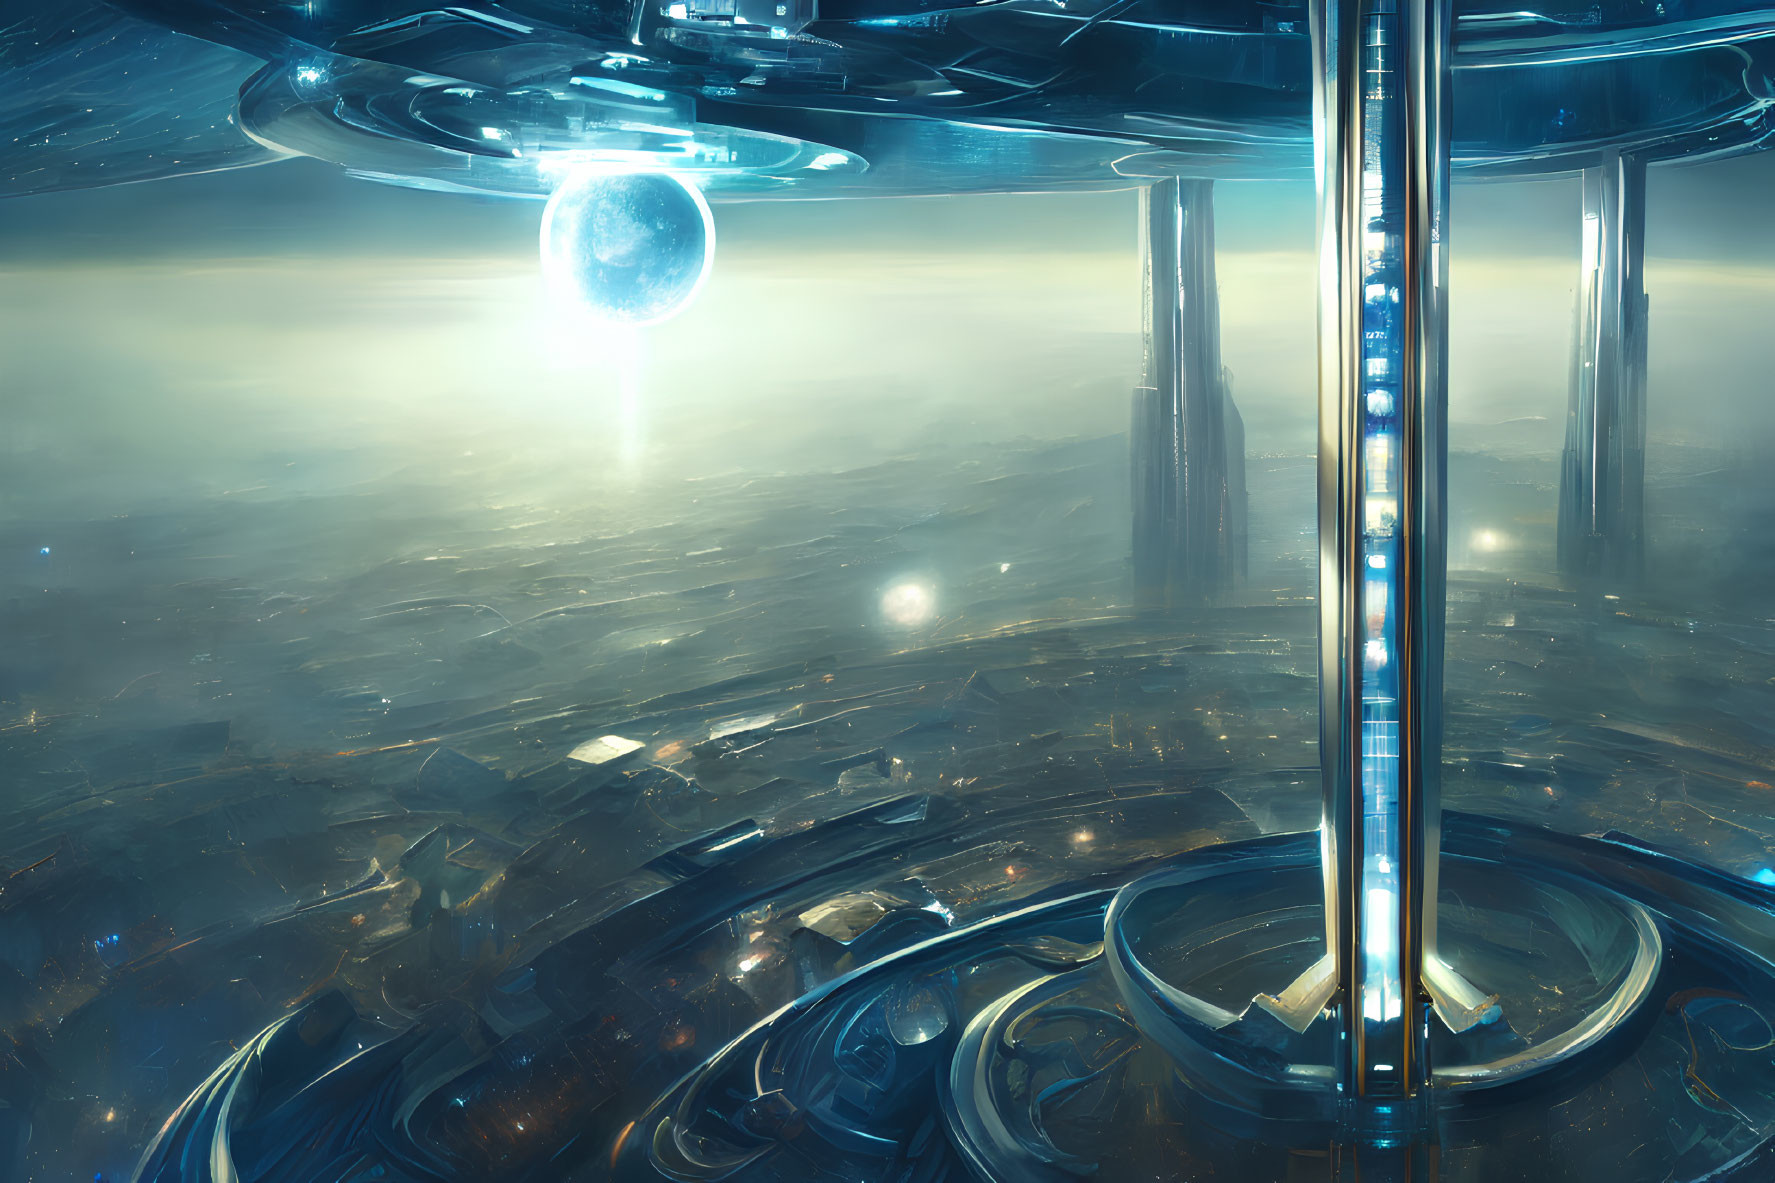 Advanced architecture in futuristic cityscape with glowing structures and celestial bodies.